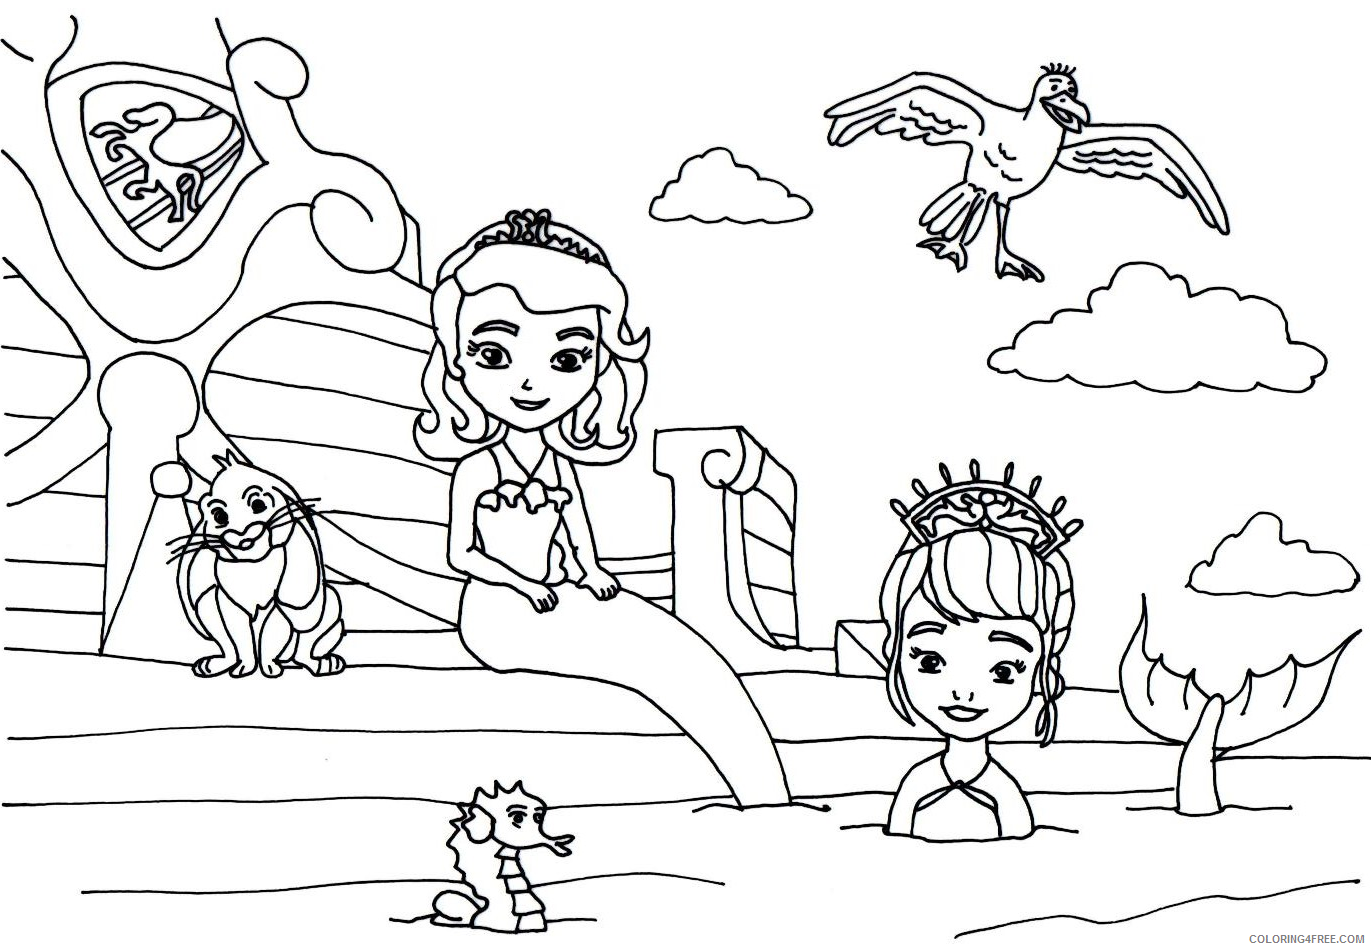 Sofia the First Coloring Pages Cartoons Sofia the First Mermaid 1 Printable 2020 5883 Coloring4free